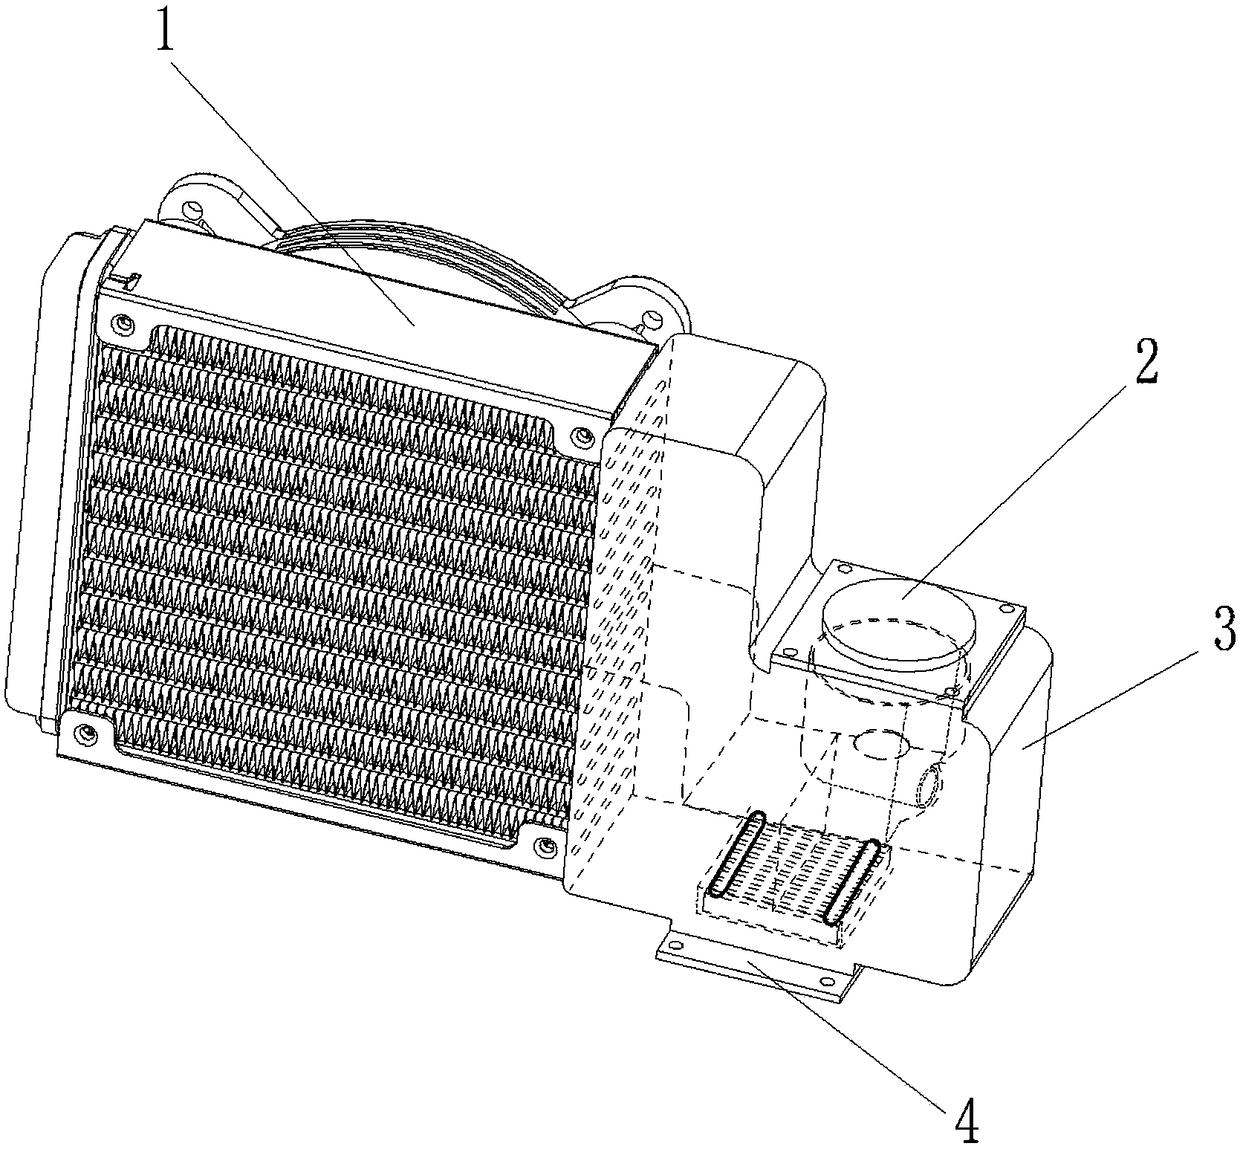 Tubeless liquid cooling heat dissipating system